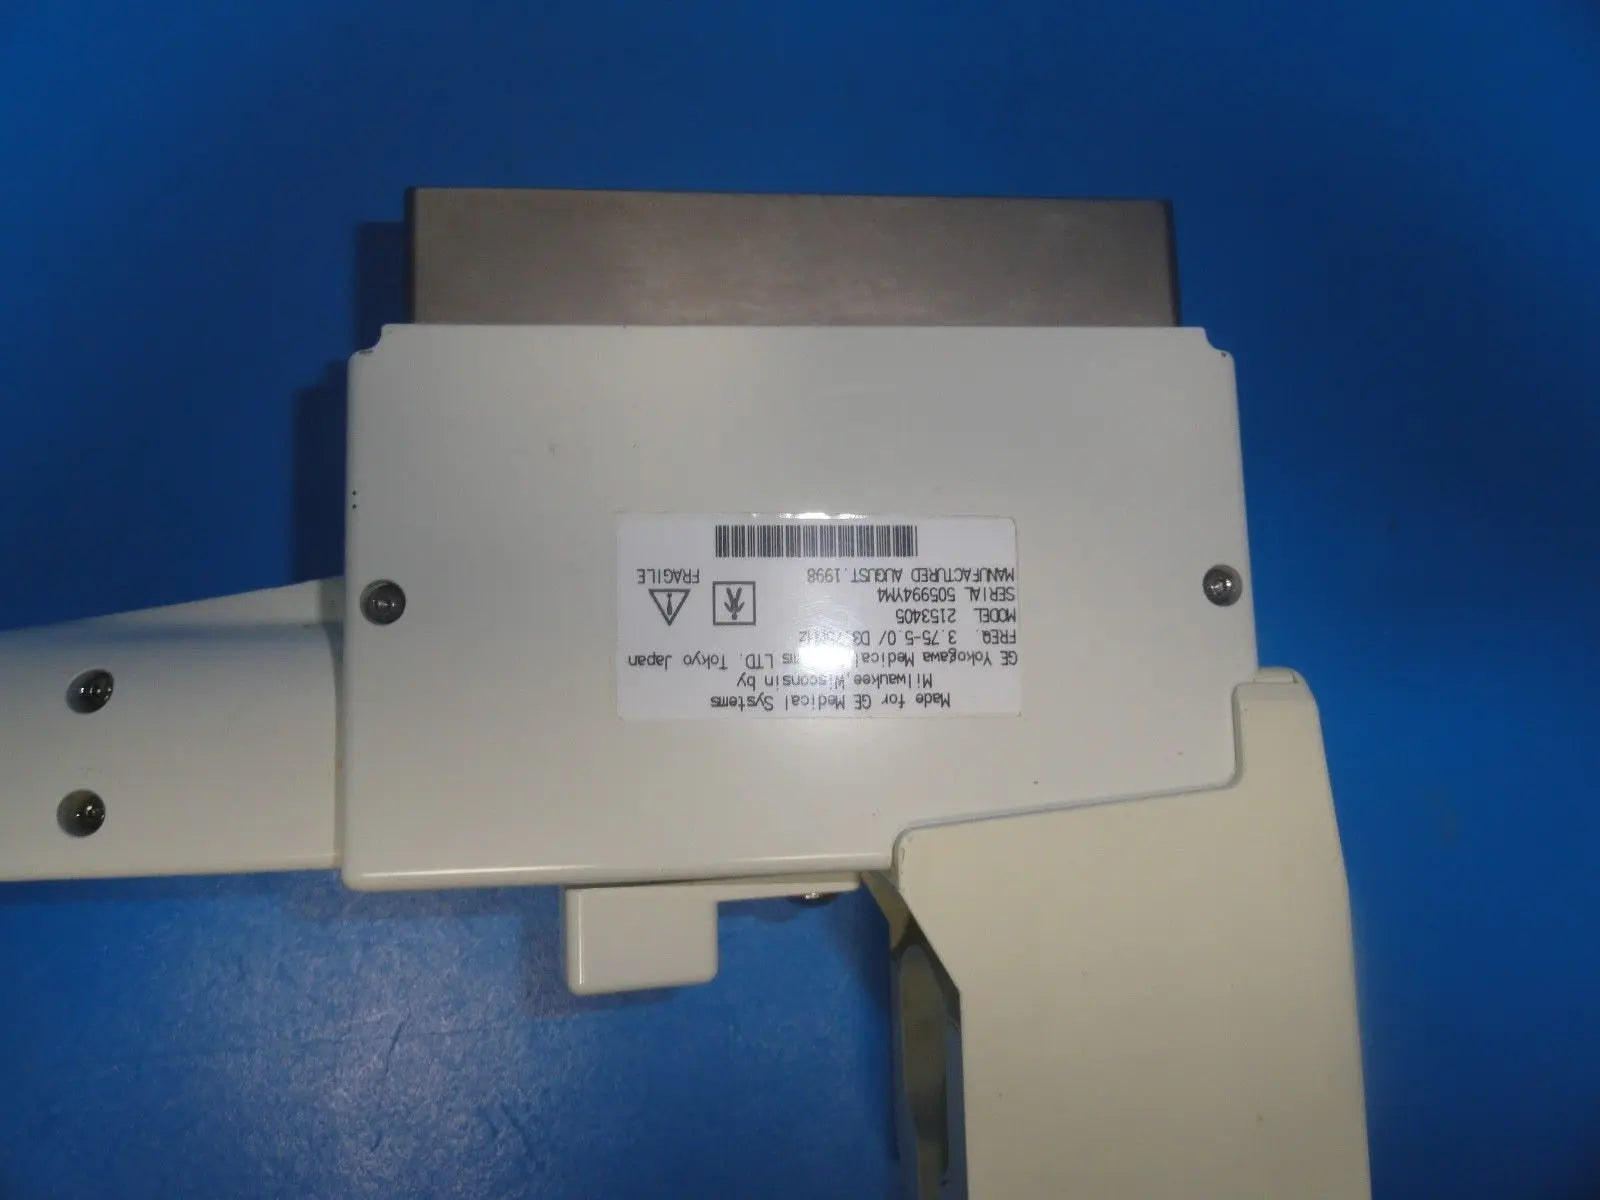 GE 546L P/N 2153405 Linear Array Ultrasound Transducer W/ Hook for logiq (6355)